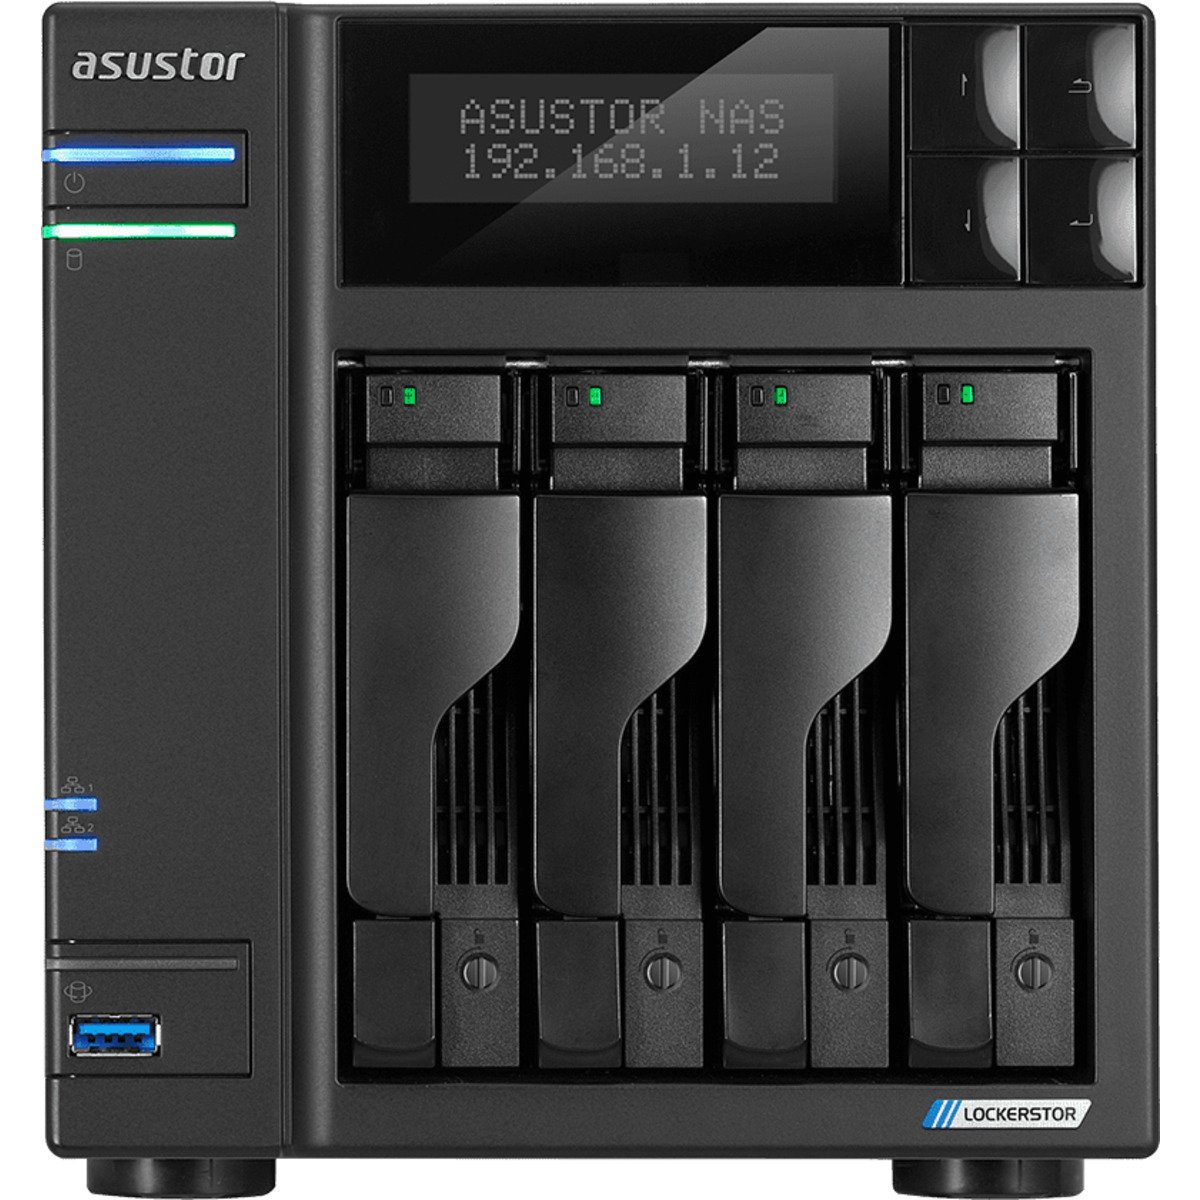 ASUSTOR AS6604T Lockerstor 4 12tb 4-Bay Desktop Multimedia / Power User / Business NAS - Network Attached Storage Device 3x4tb Seagate IronWolf ST4000VN006 3.5 5400rpm SATA 6Gb/s HDD NAS Class Drives Installed - Burn-In Tested - FREE RAM UPGRADE AS6604T Lockerstor 4